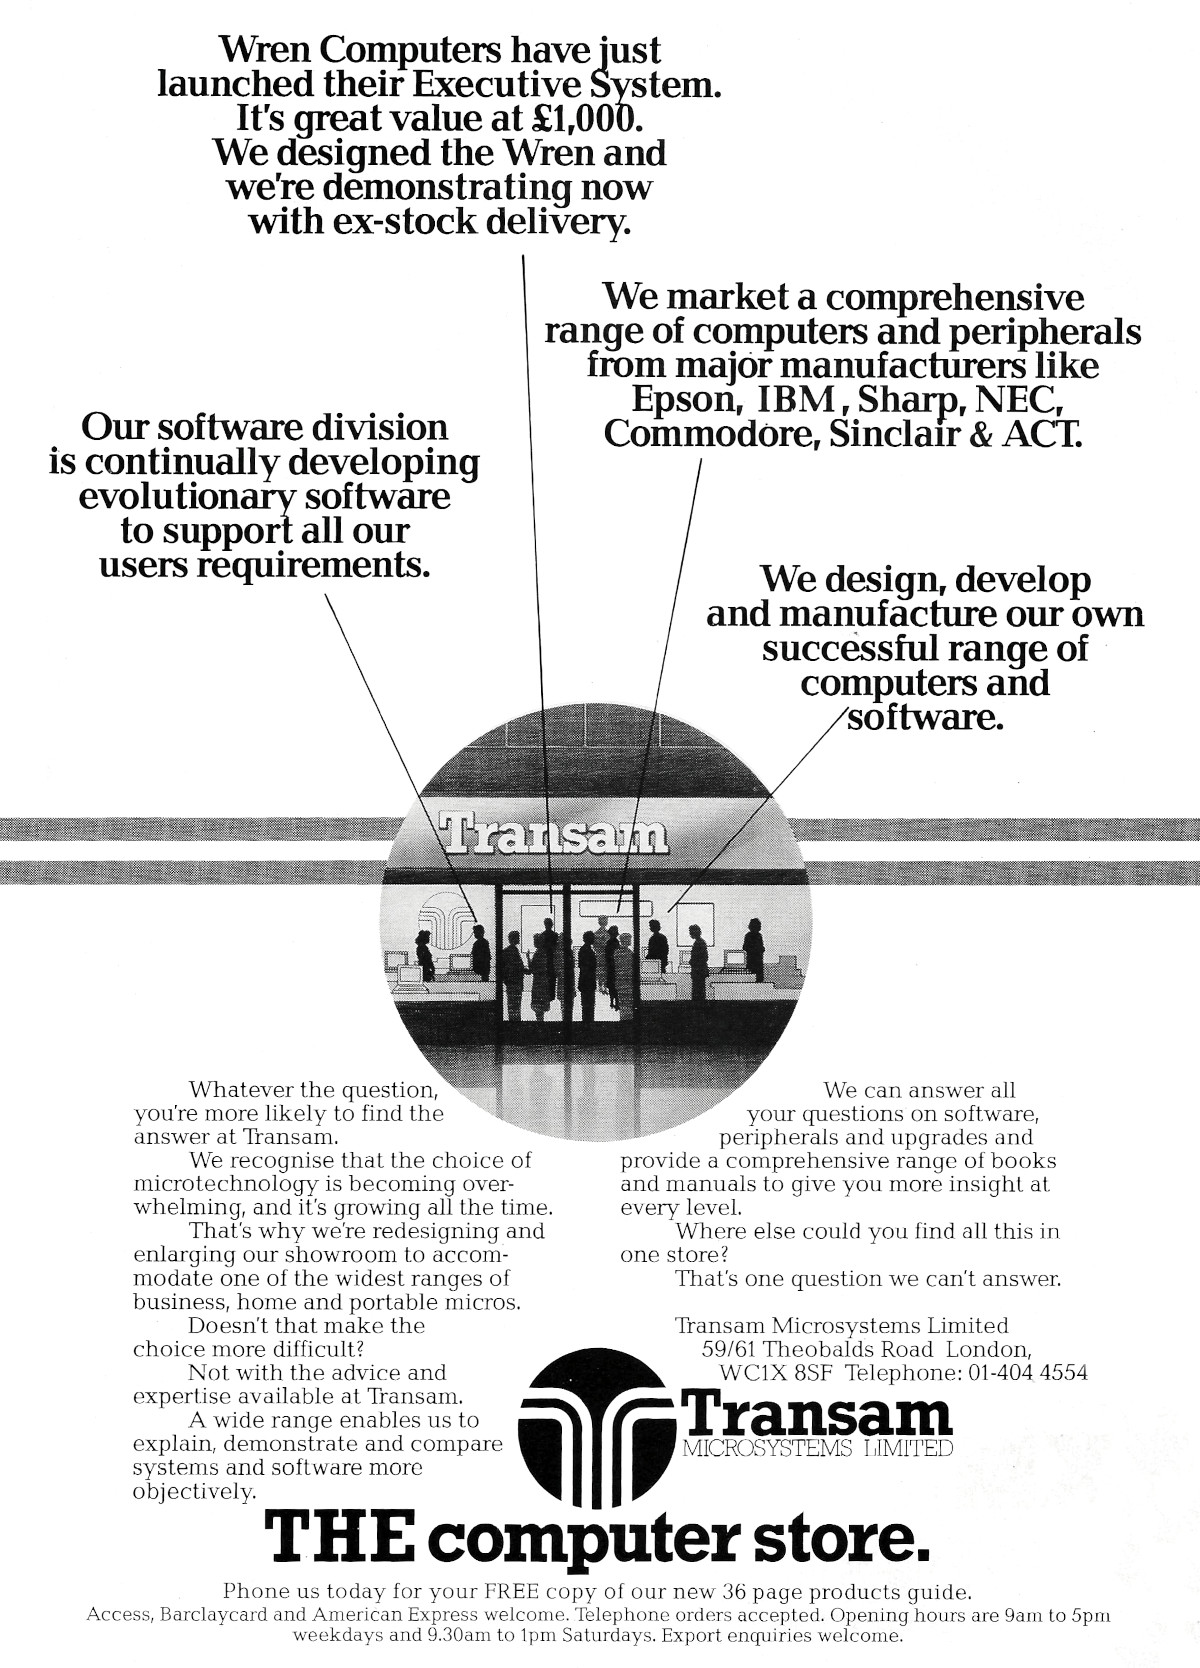 An artist's impression of Transam's retail outlet on Theobalds Road in London. The advert also mentions the ill-fated Wren Executive micro which Transam designed in collaboration with Prism Microproducts in 1984. From Personal Computer World, May 1984